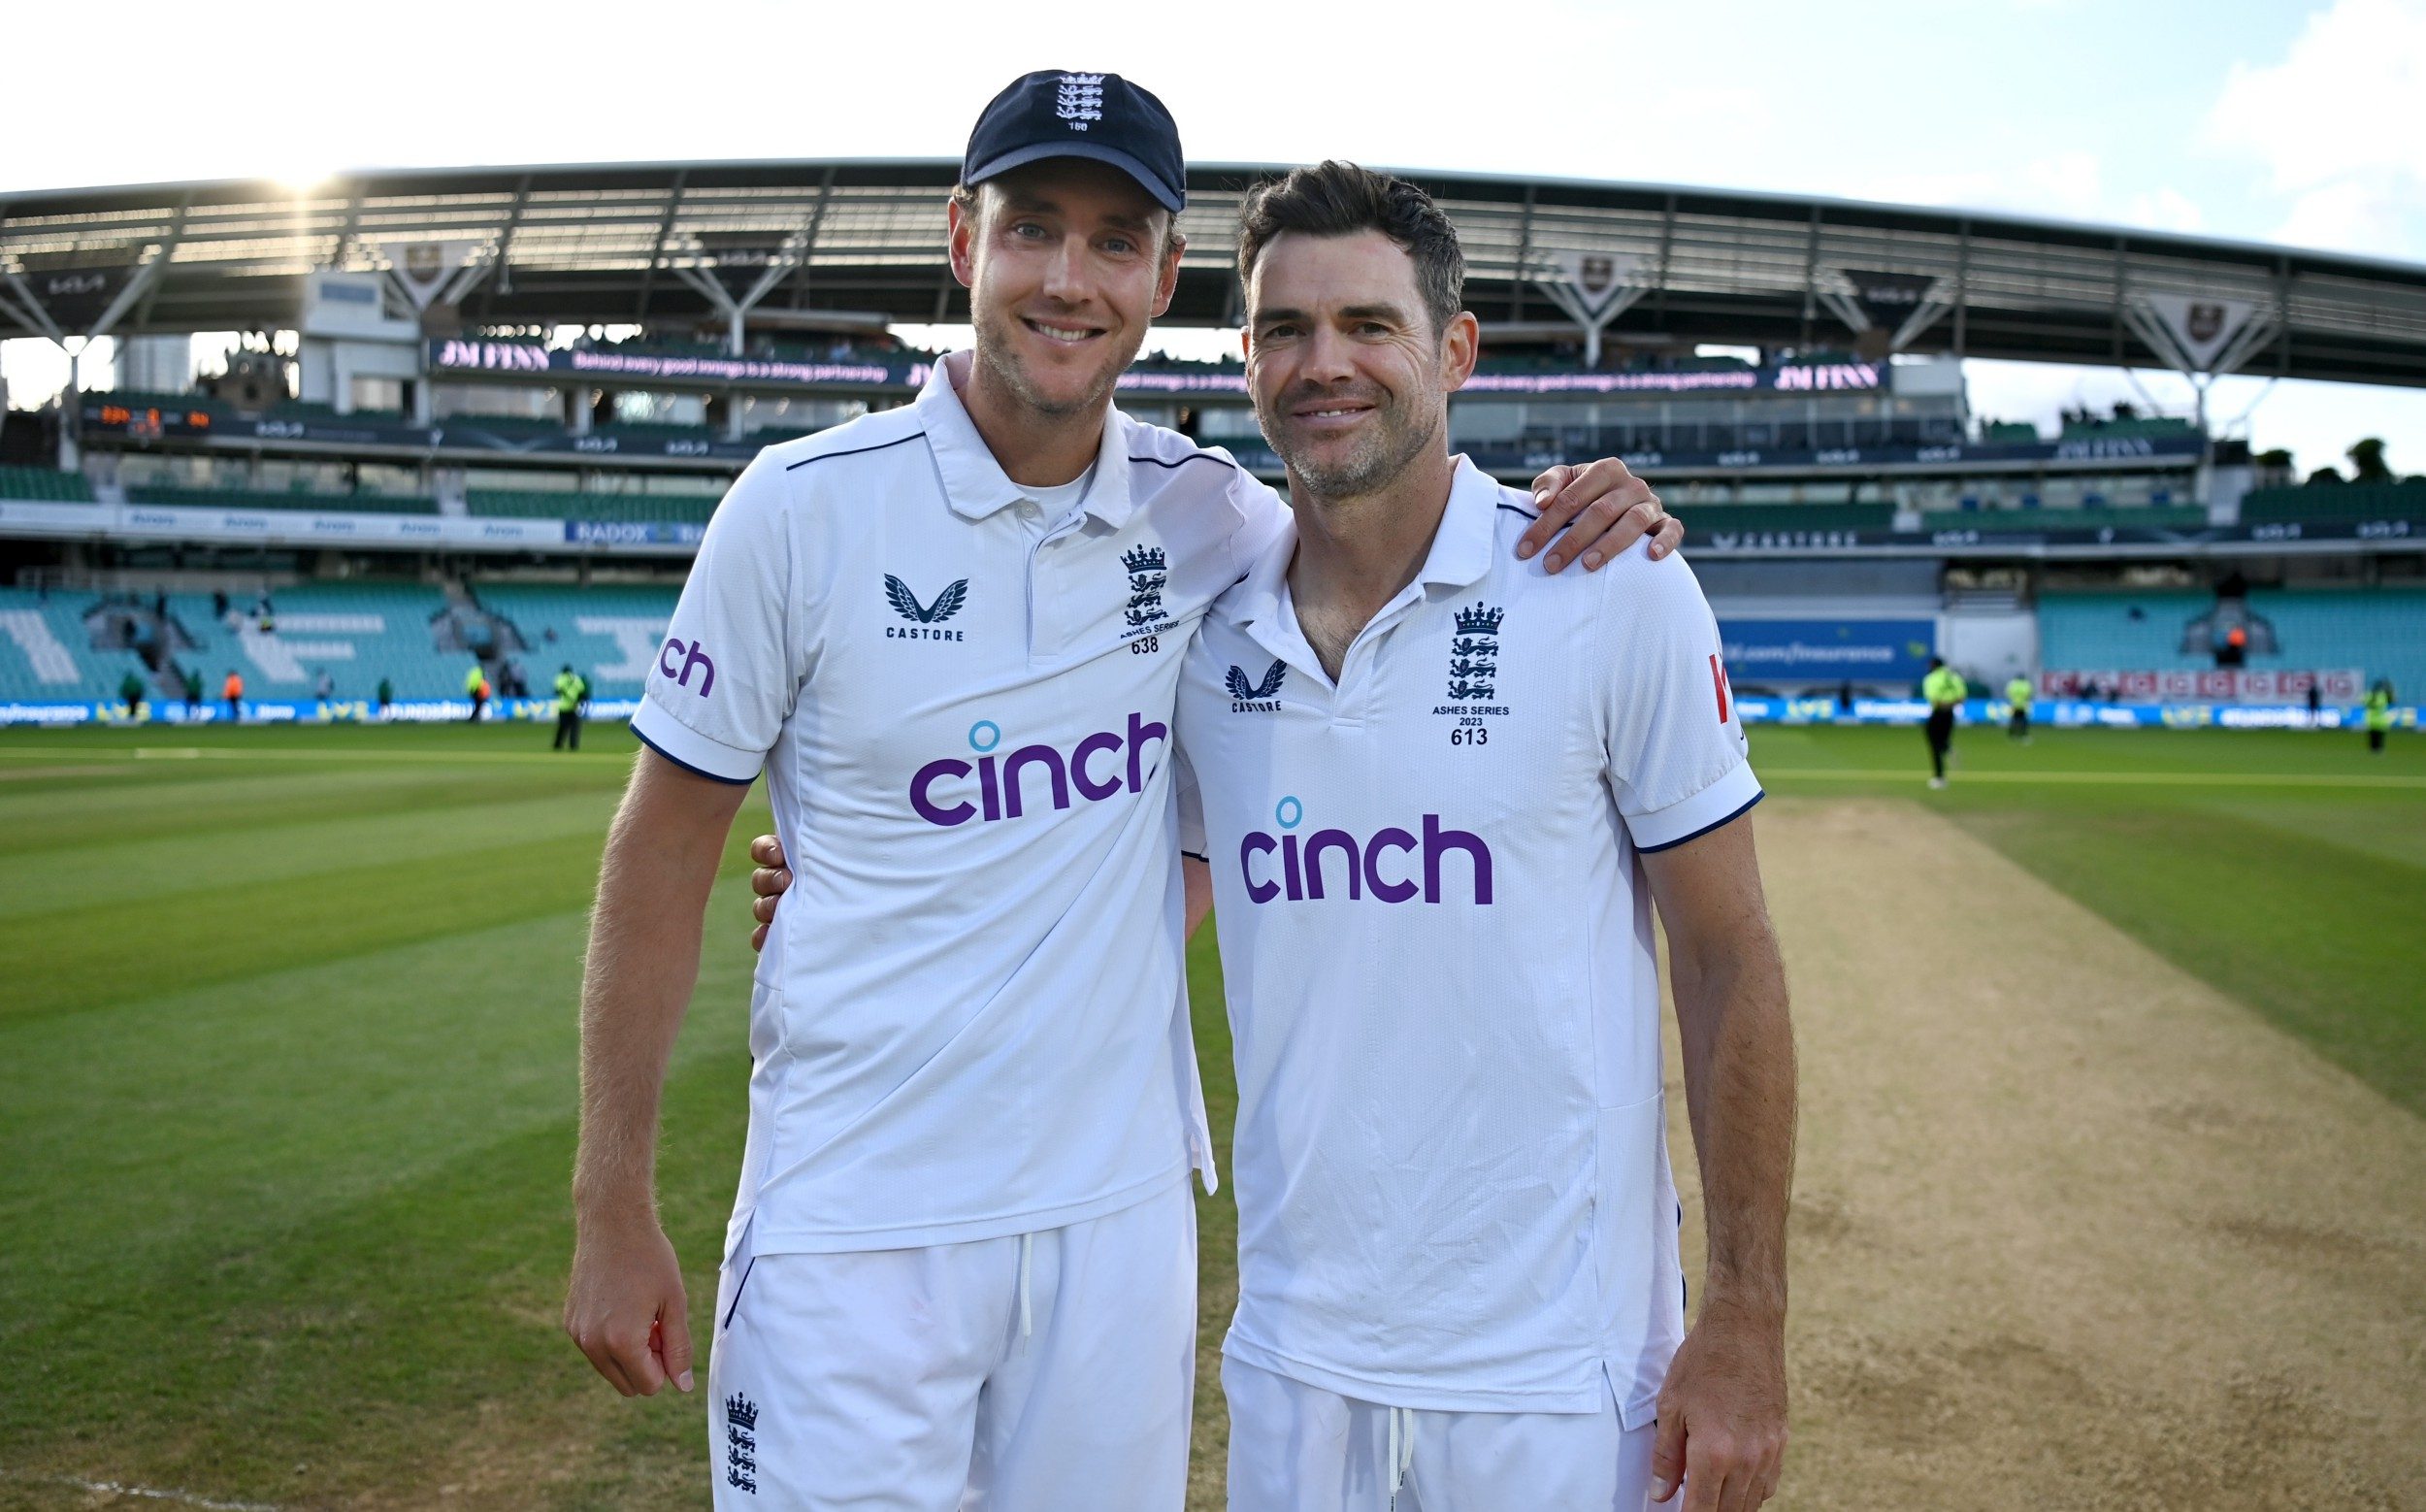 james anderson’s 700 wickets: ‘you would not expect a player to improve as they get older’